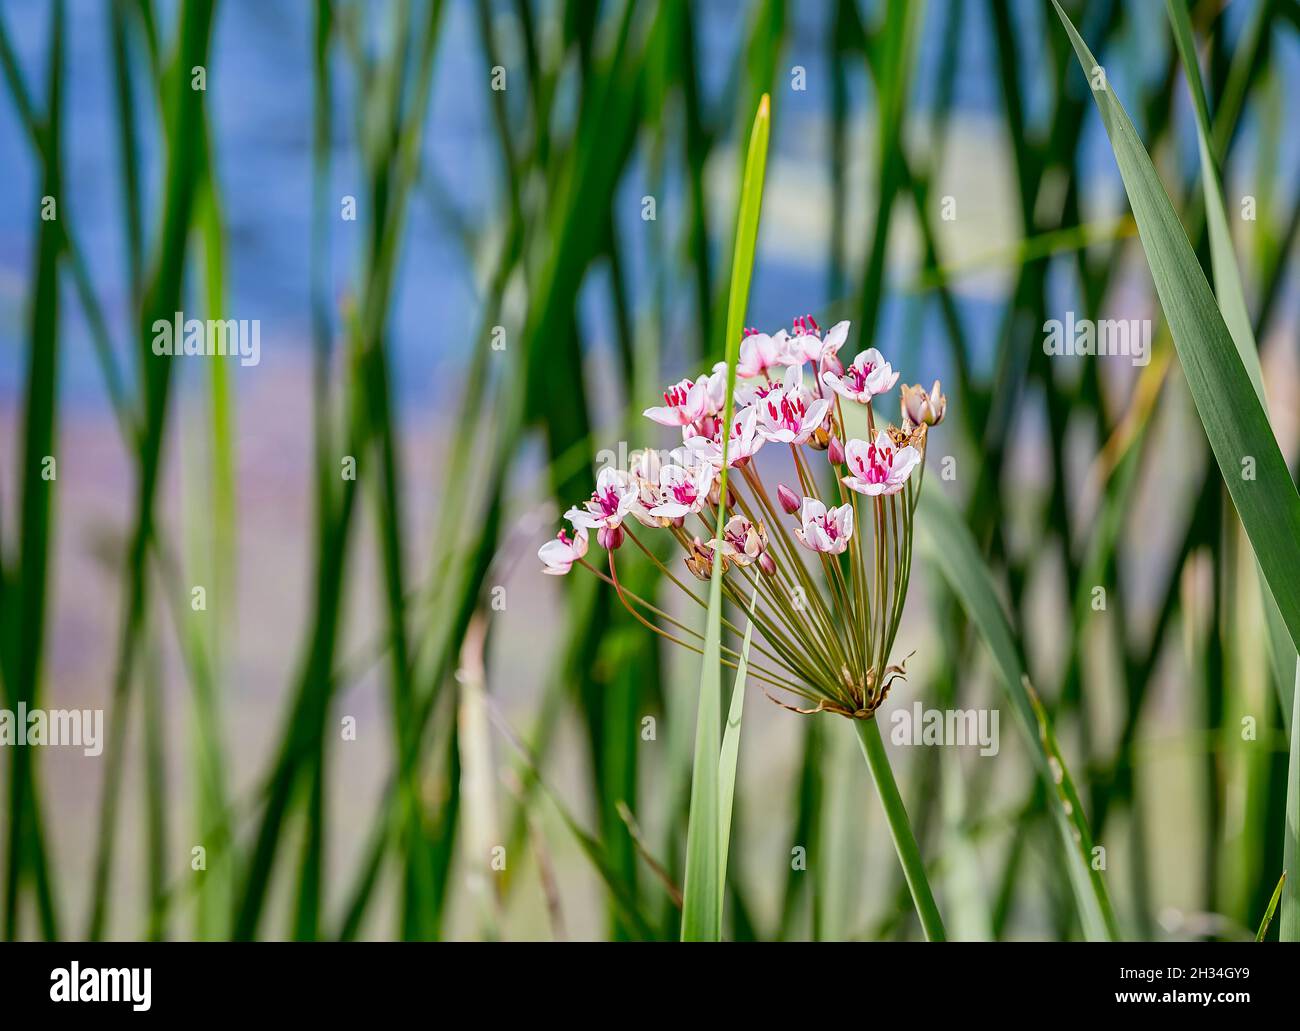 Pink flowers of flowering rush or grass rush (Butomus umbellatus) on the river bank. Stock Photo